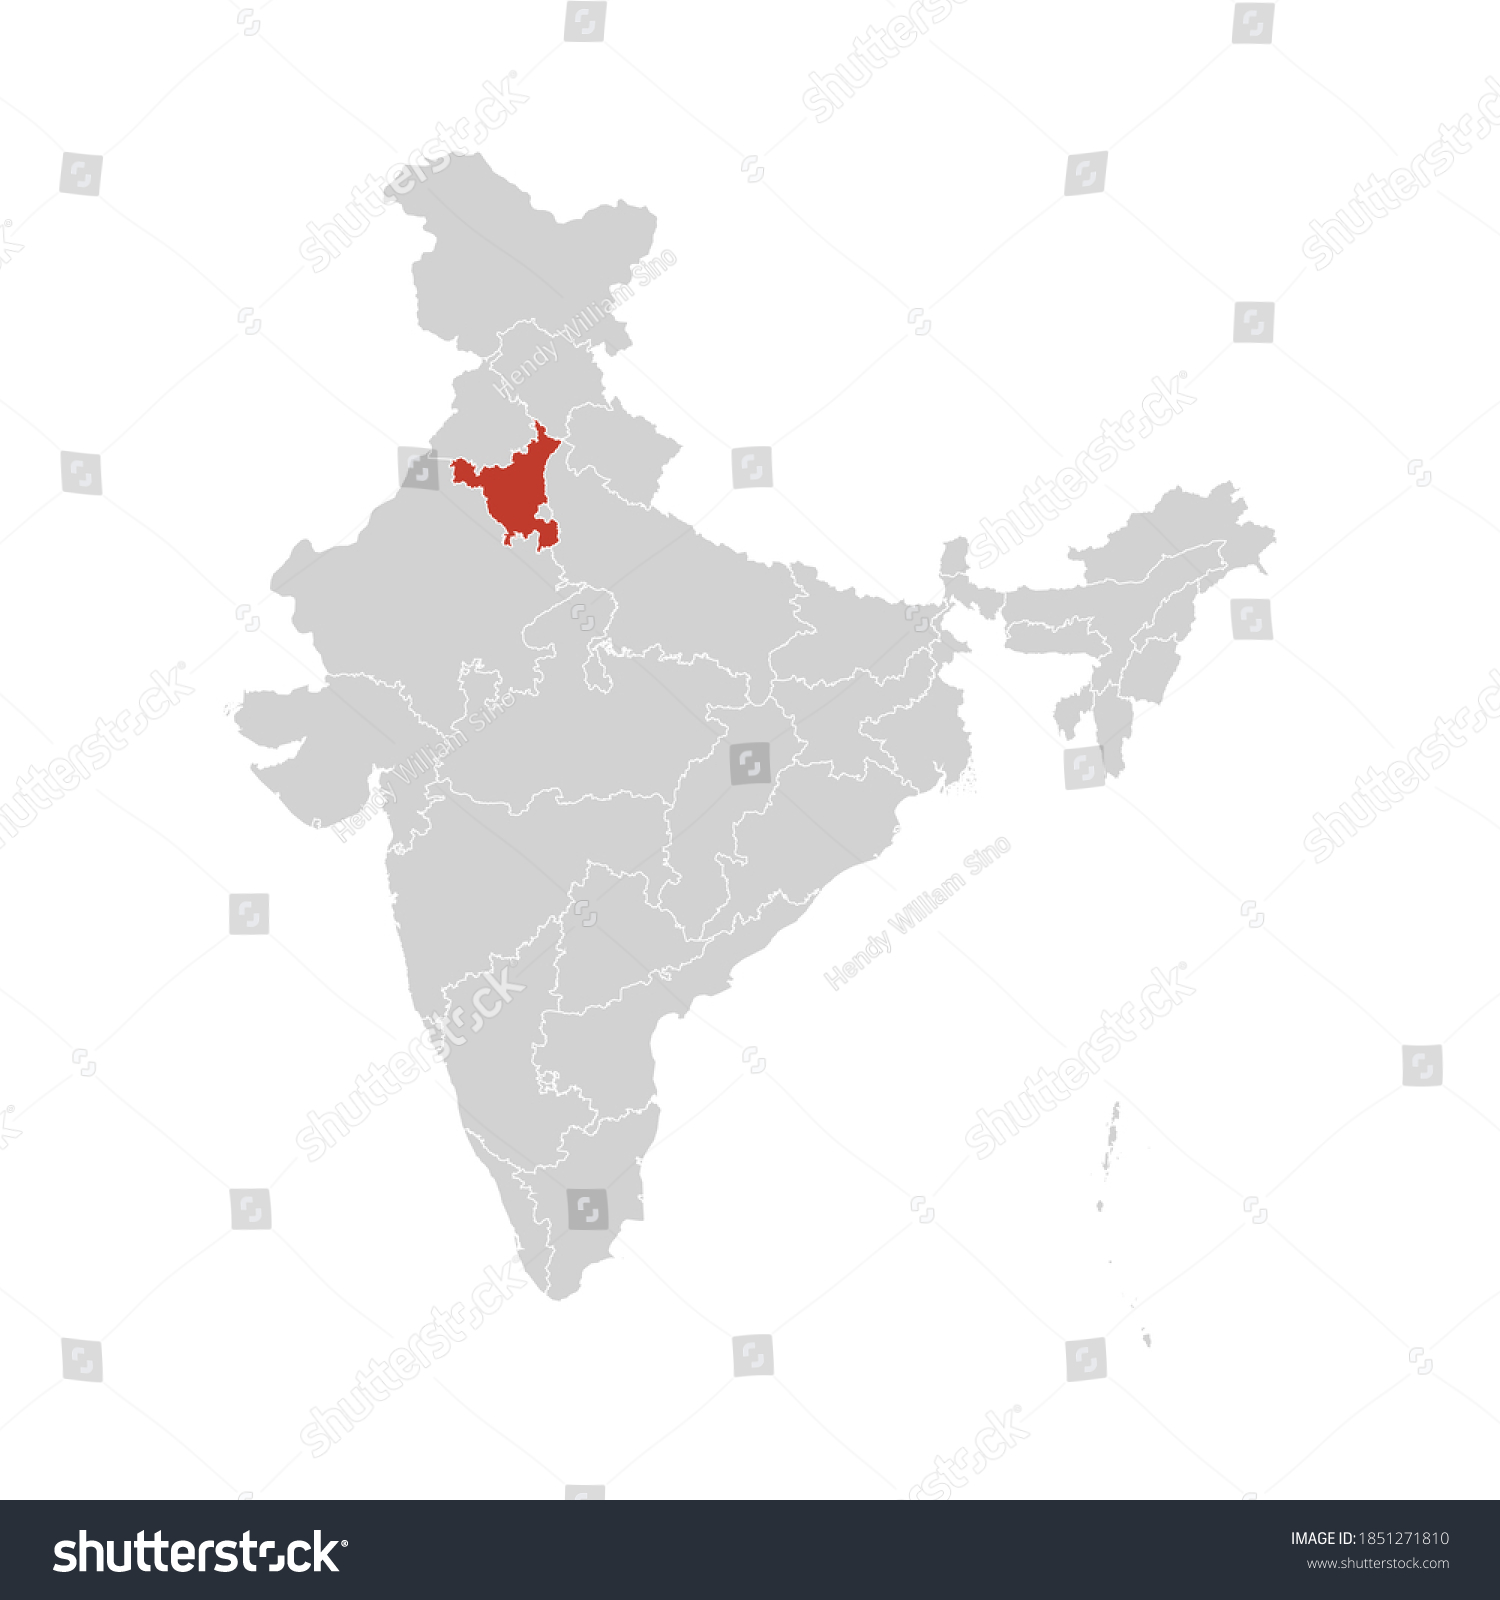 Haryana In India Map Haryana Highlighted On India Map Eps Stock Vector (Royalty Free) 1851271810  | Shutterstock